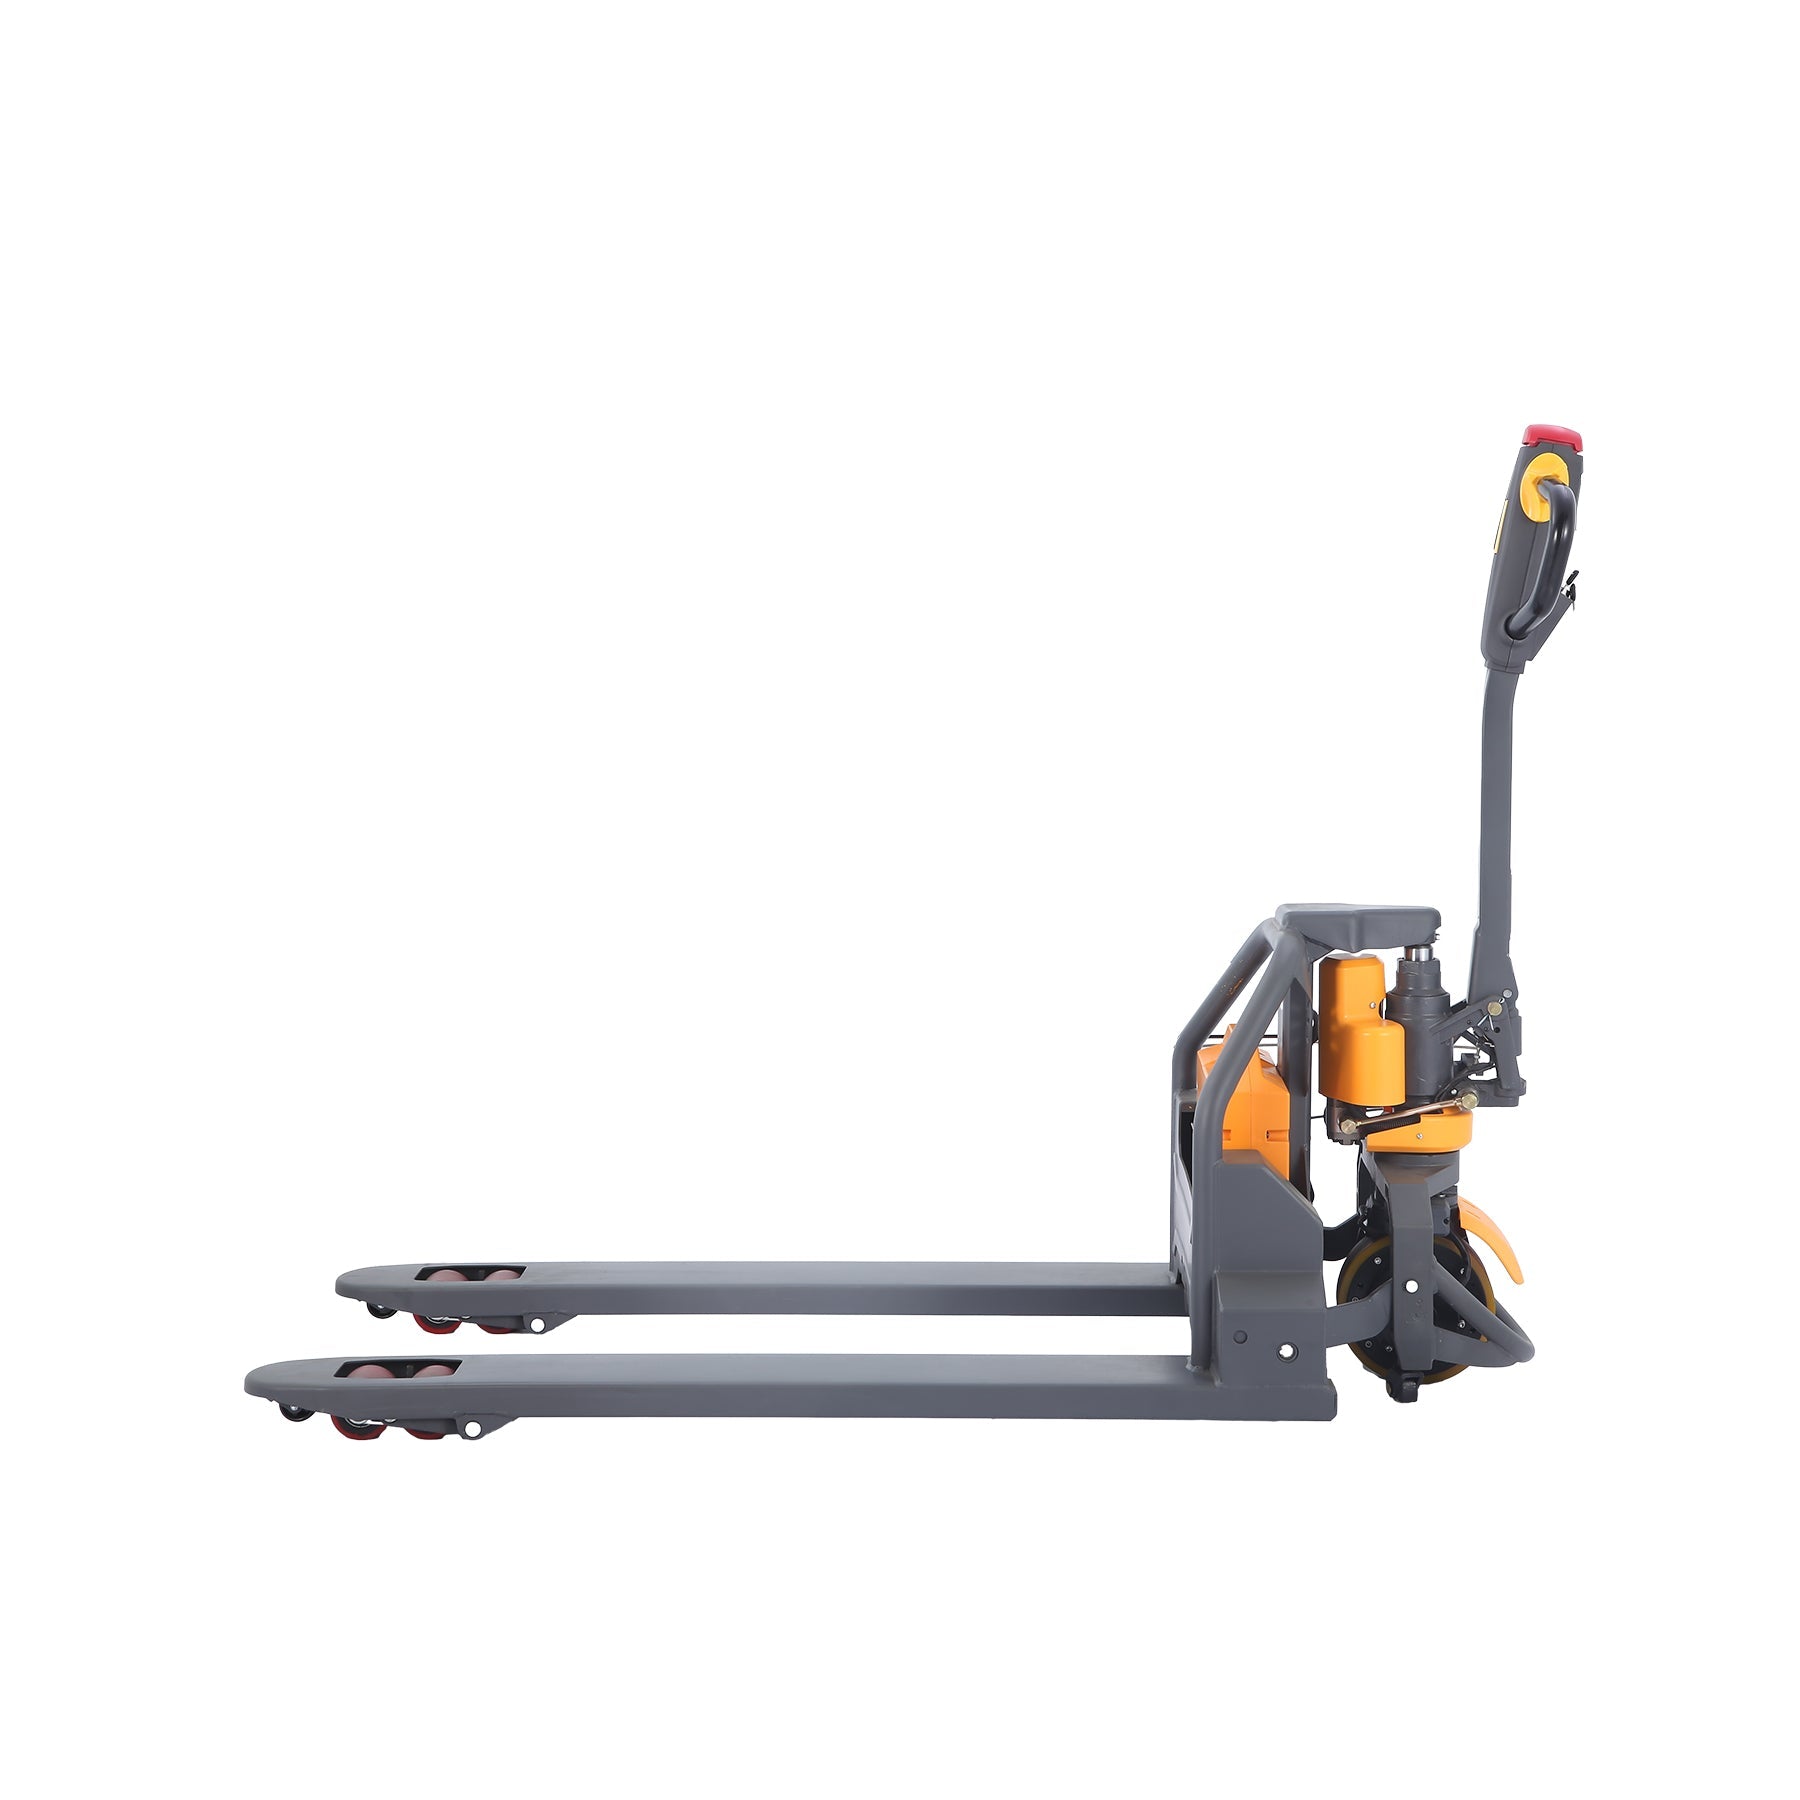 ApolloLift | Lithium Battery 3300Lbs Full Electric Pallet Jack Electric Forklift 48" x27"